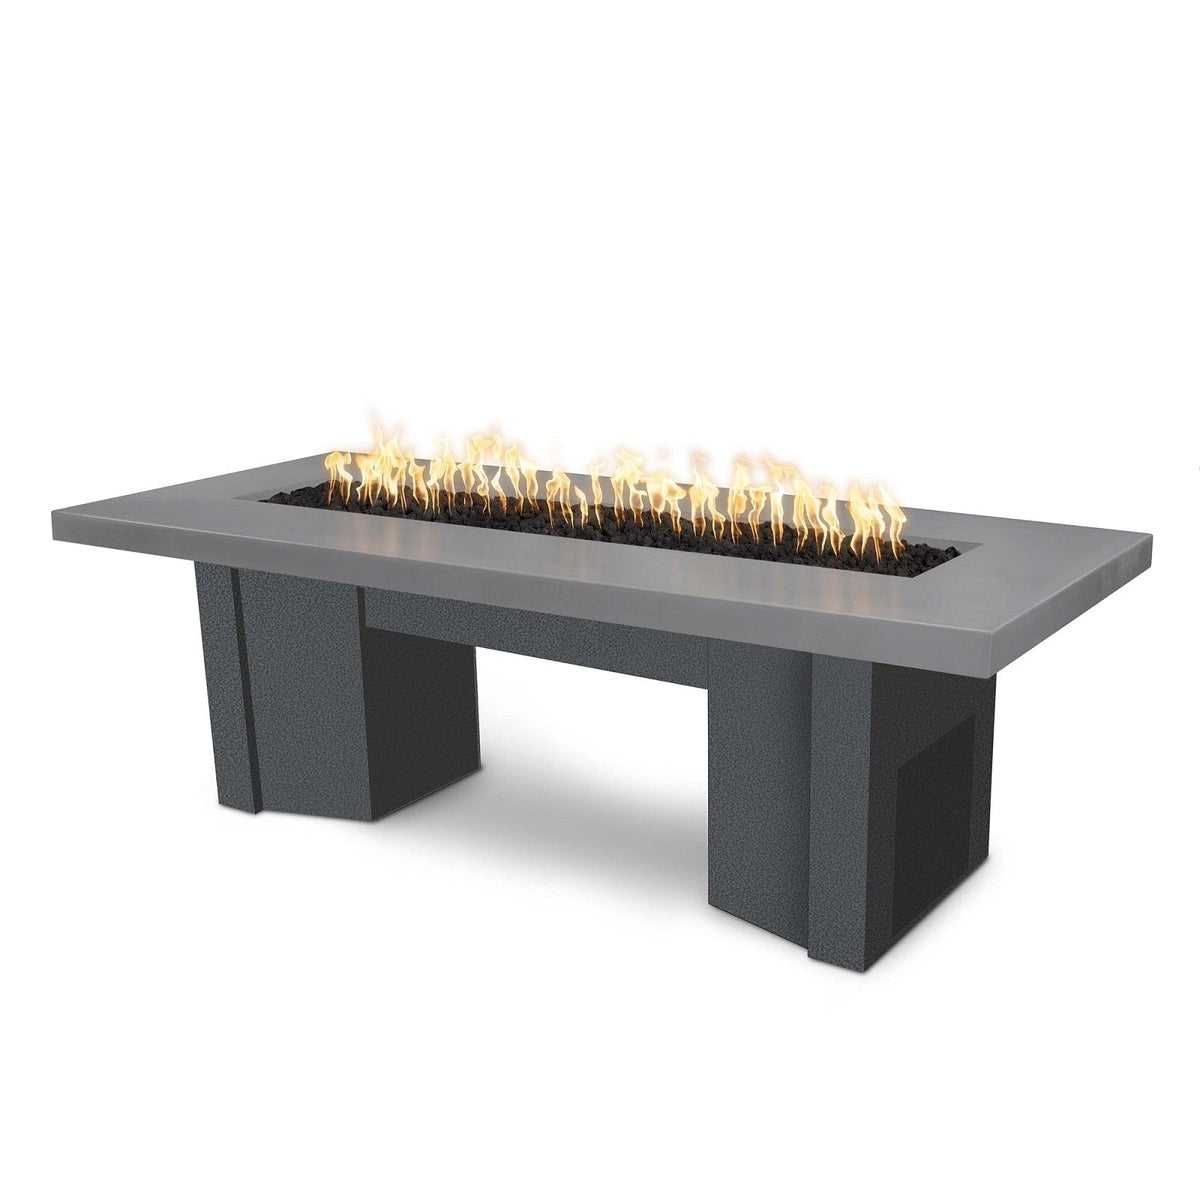 The Outdoor Plus Fire Features Natural Gray (-NGY) / Silver Vein Powder Coated Steel (-SLV) The Outdoor Plus 60&quot; Alameda Fire Table Smooth Concrete in Liquid Propane - Flame Sense System with Push Button Spark Igniter / OPT-ALMGFRC60FSEN-LP